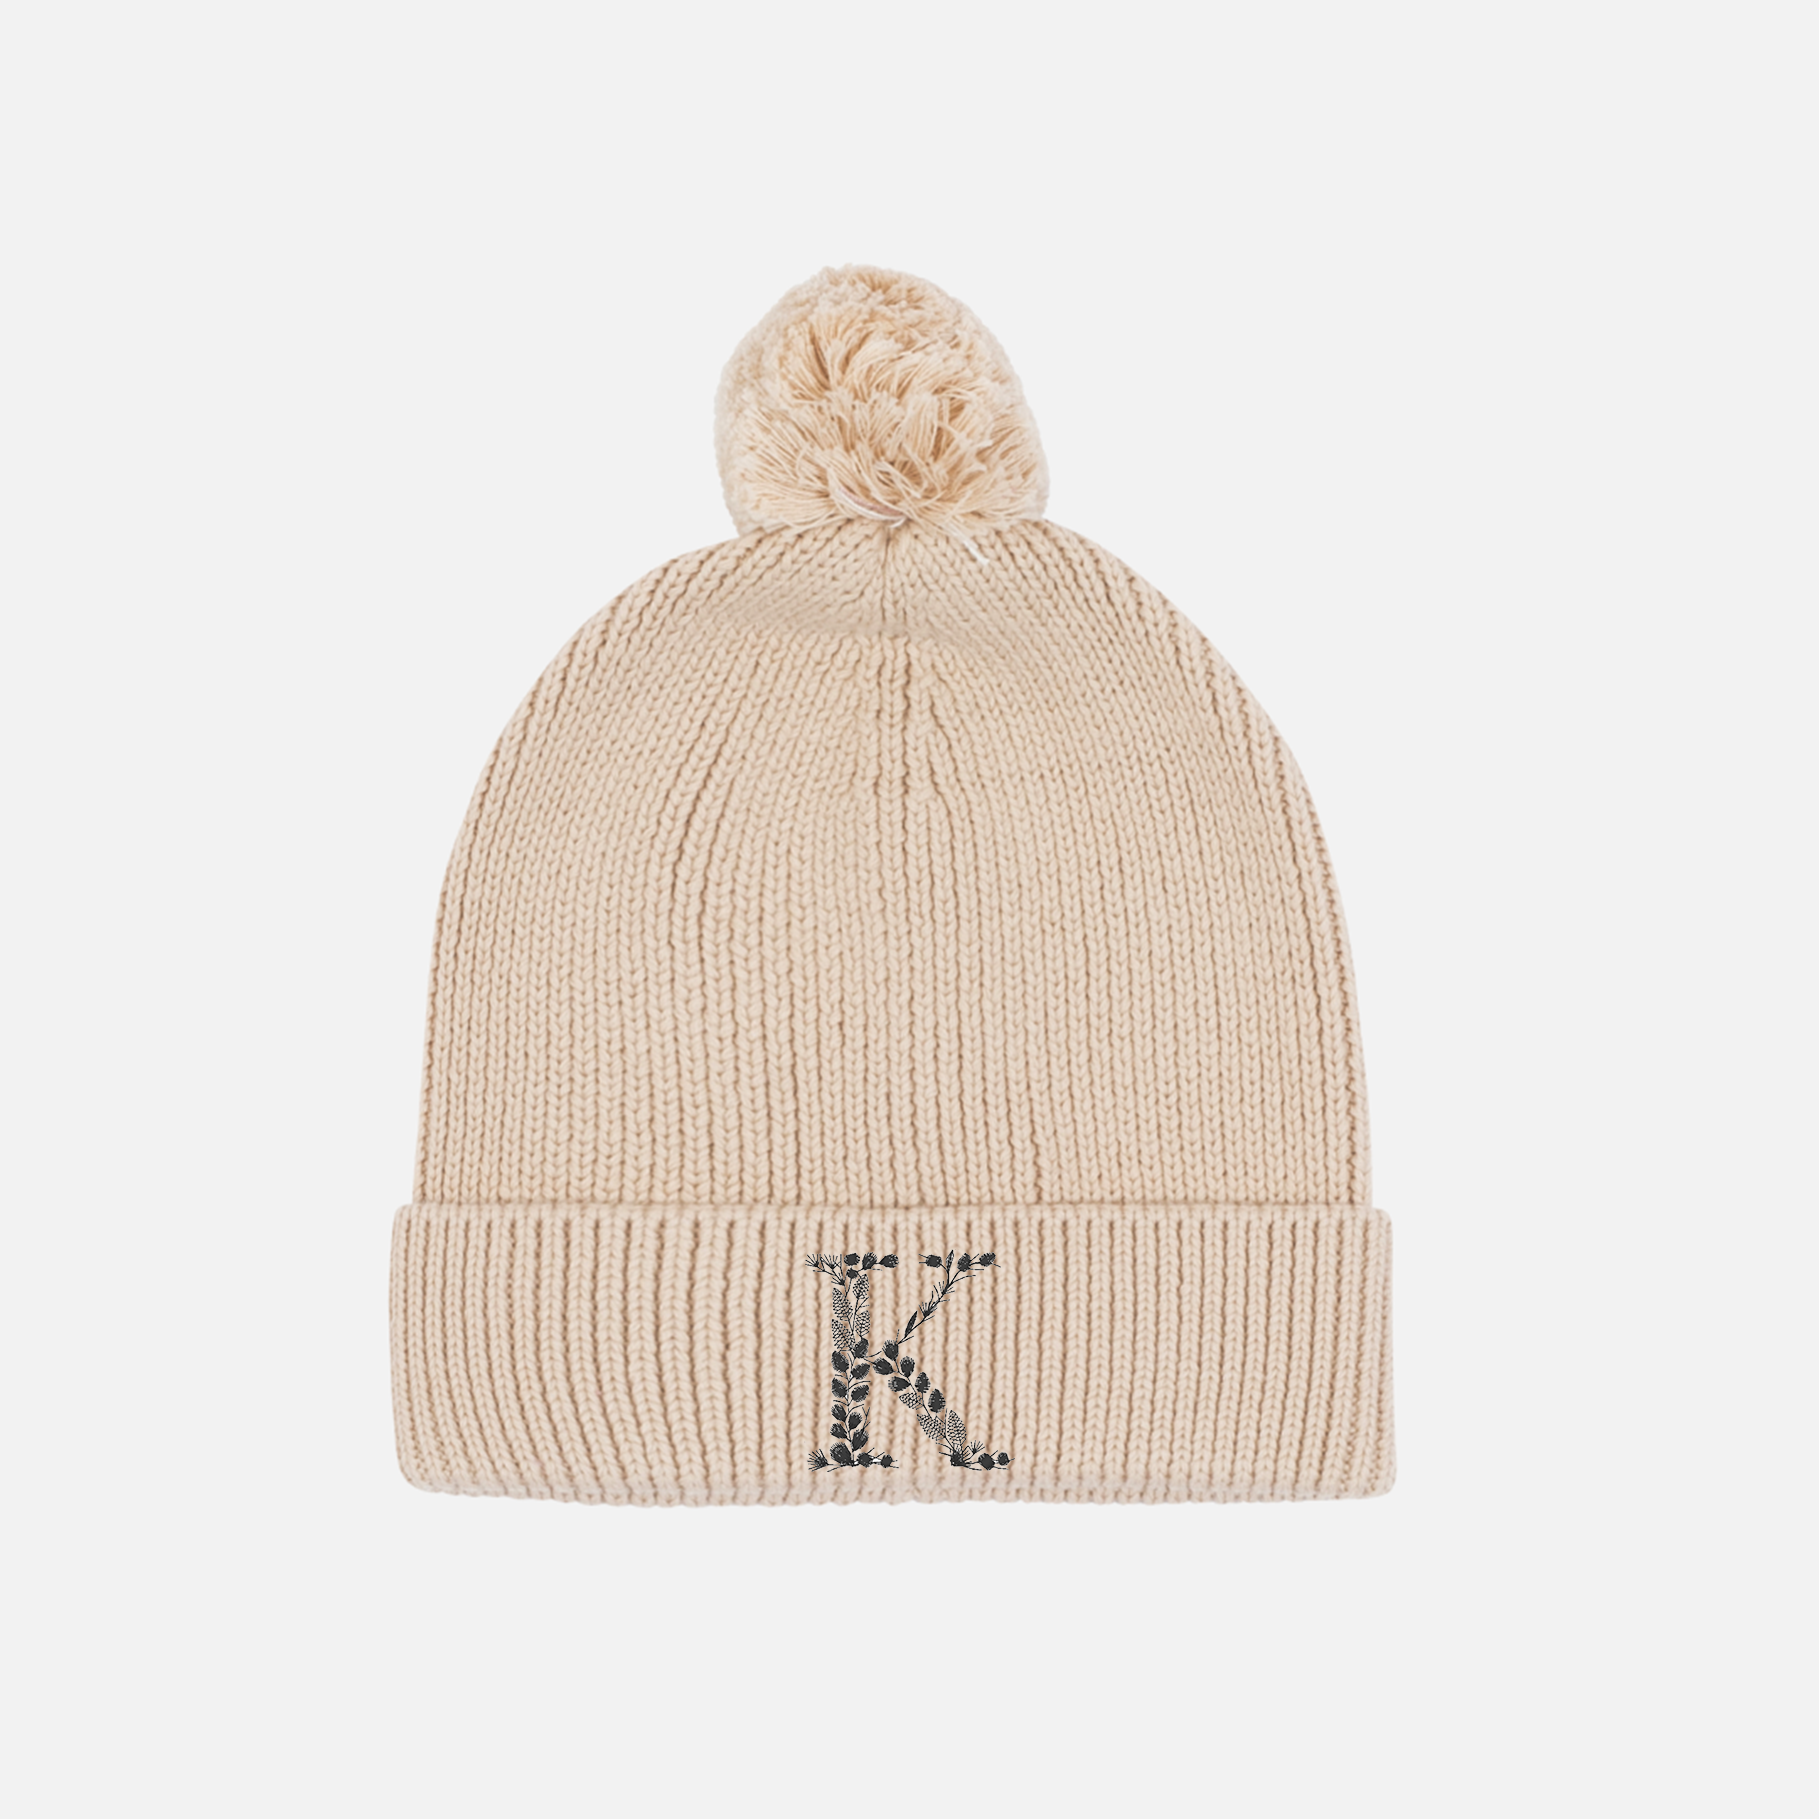 Embroidered Knitted Beanie - Oatmeal